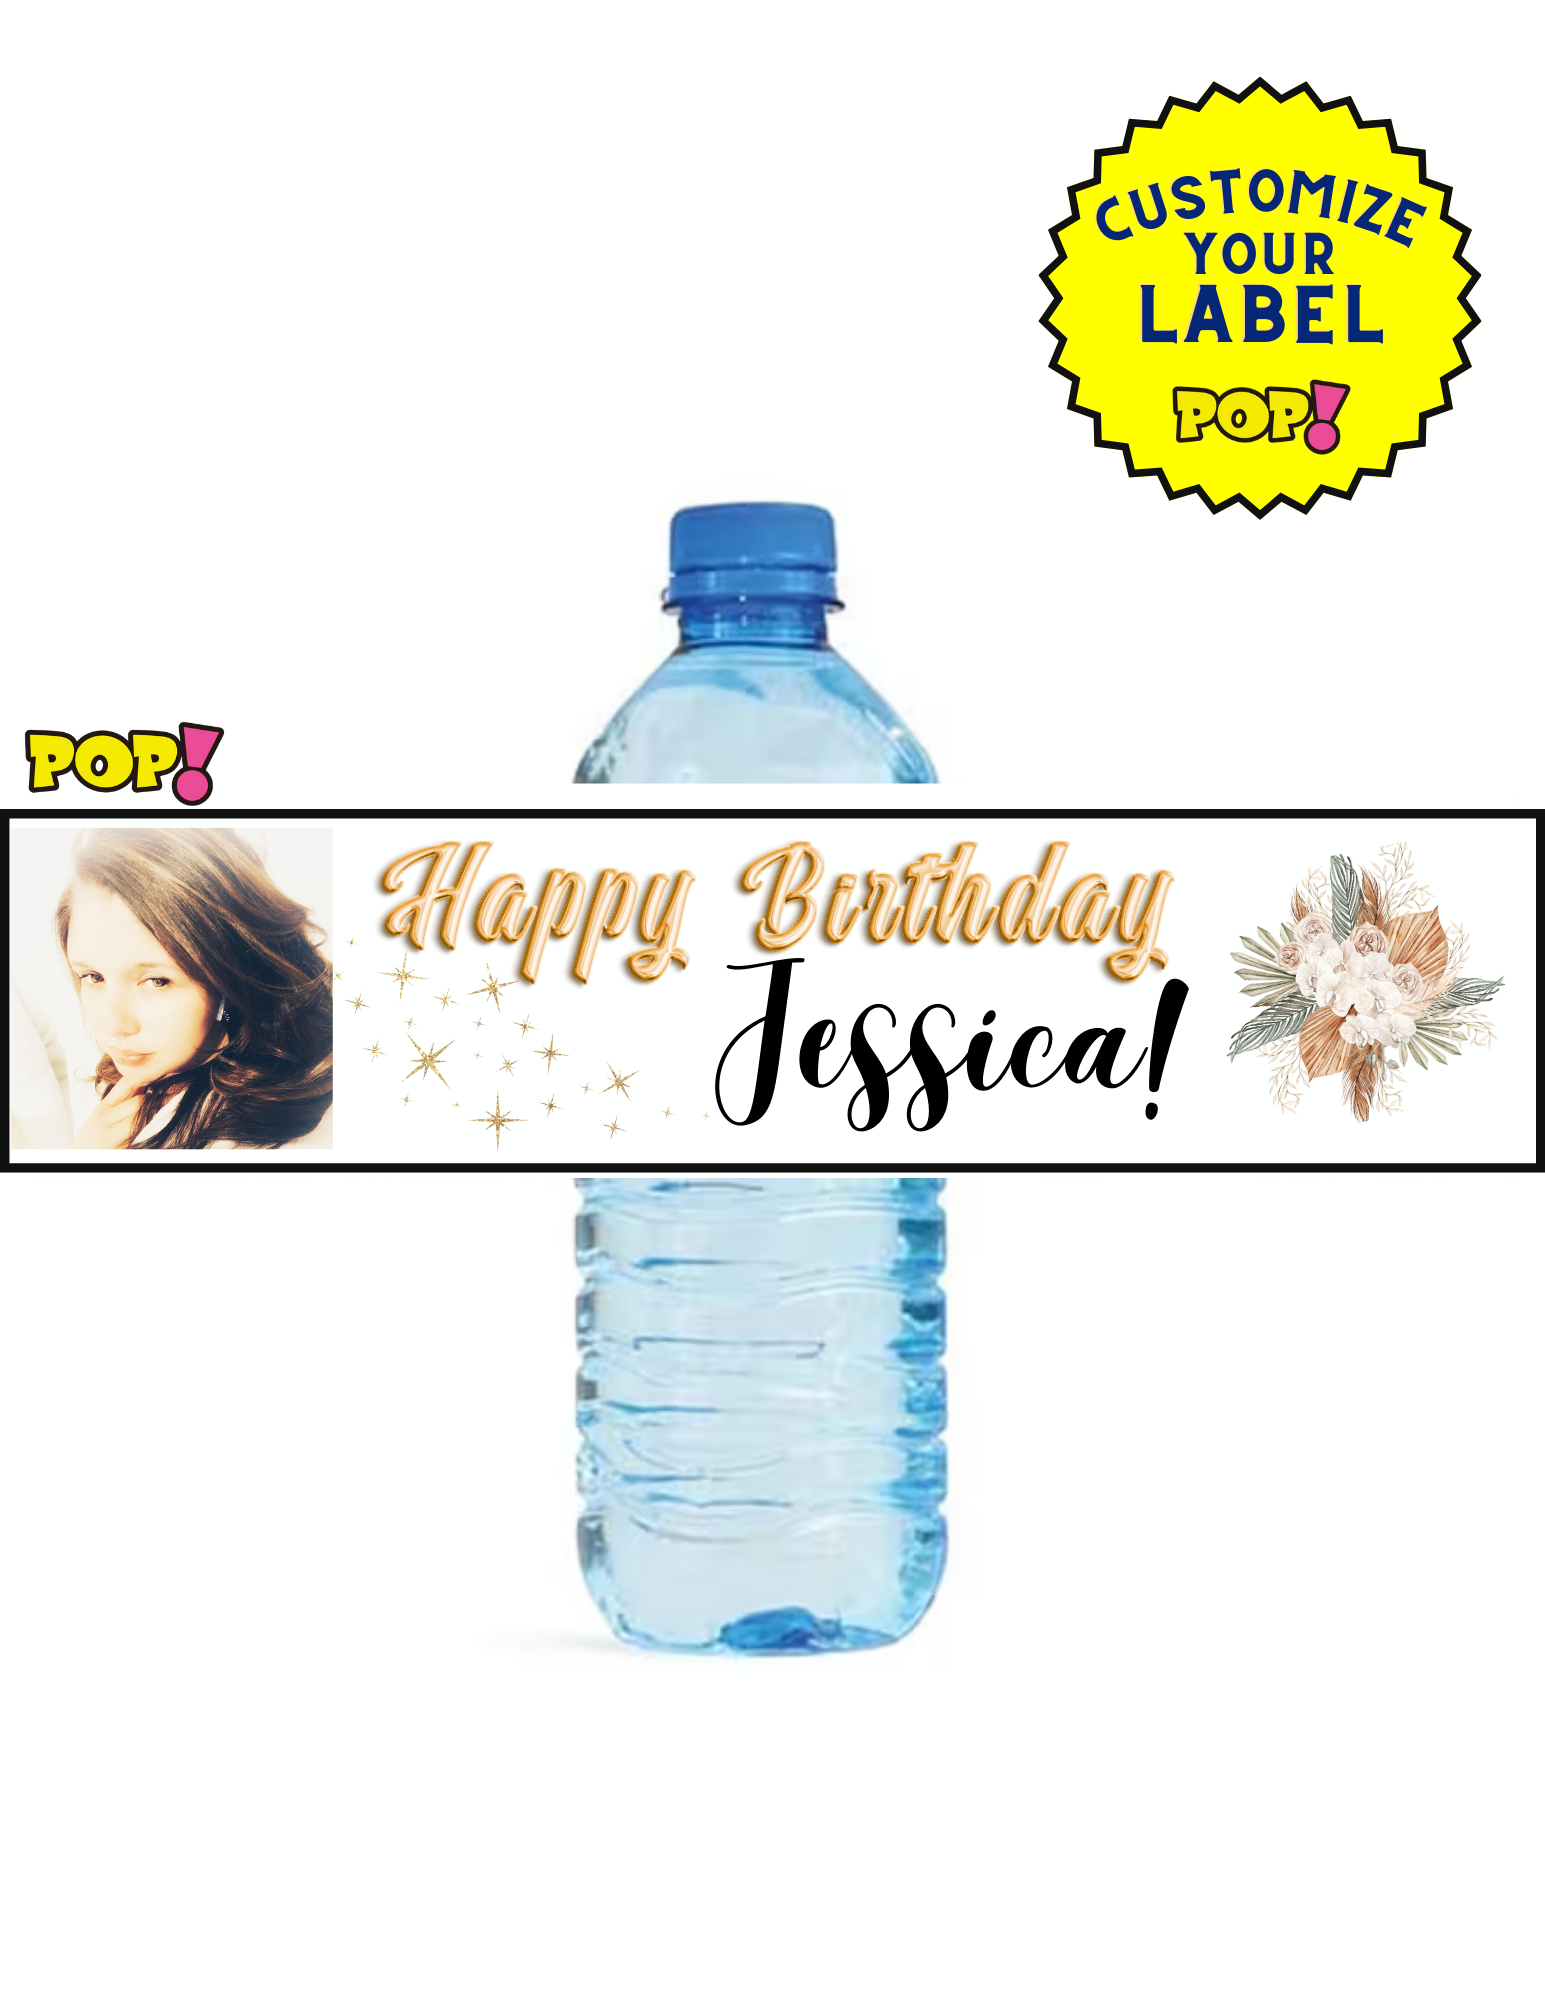 Custom Water Bottle Labels - Customize Your Design - POPPartyballoons